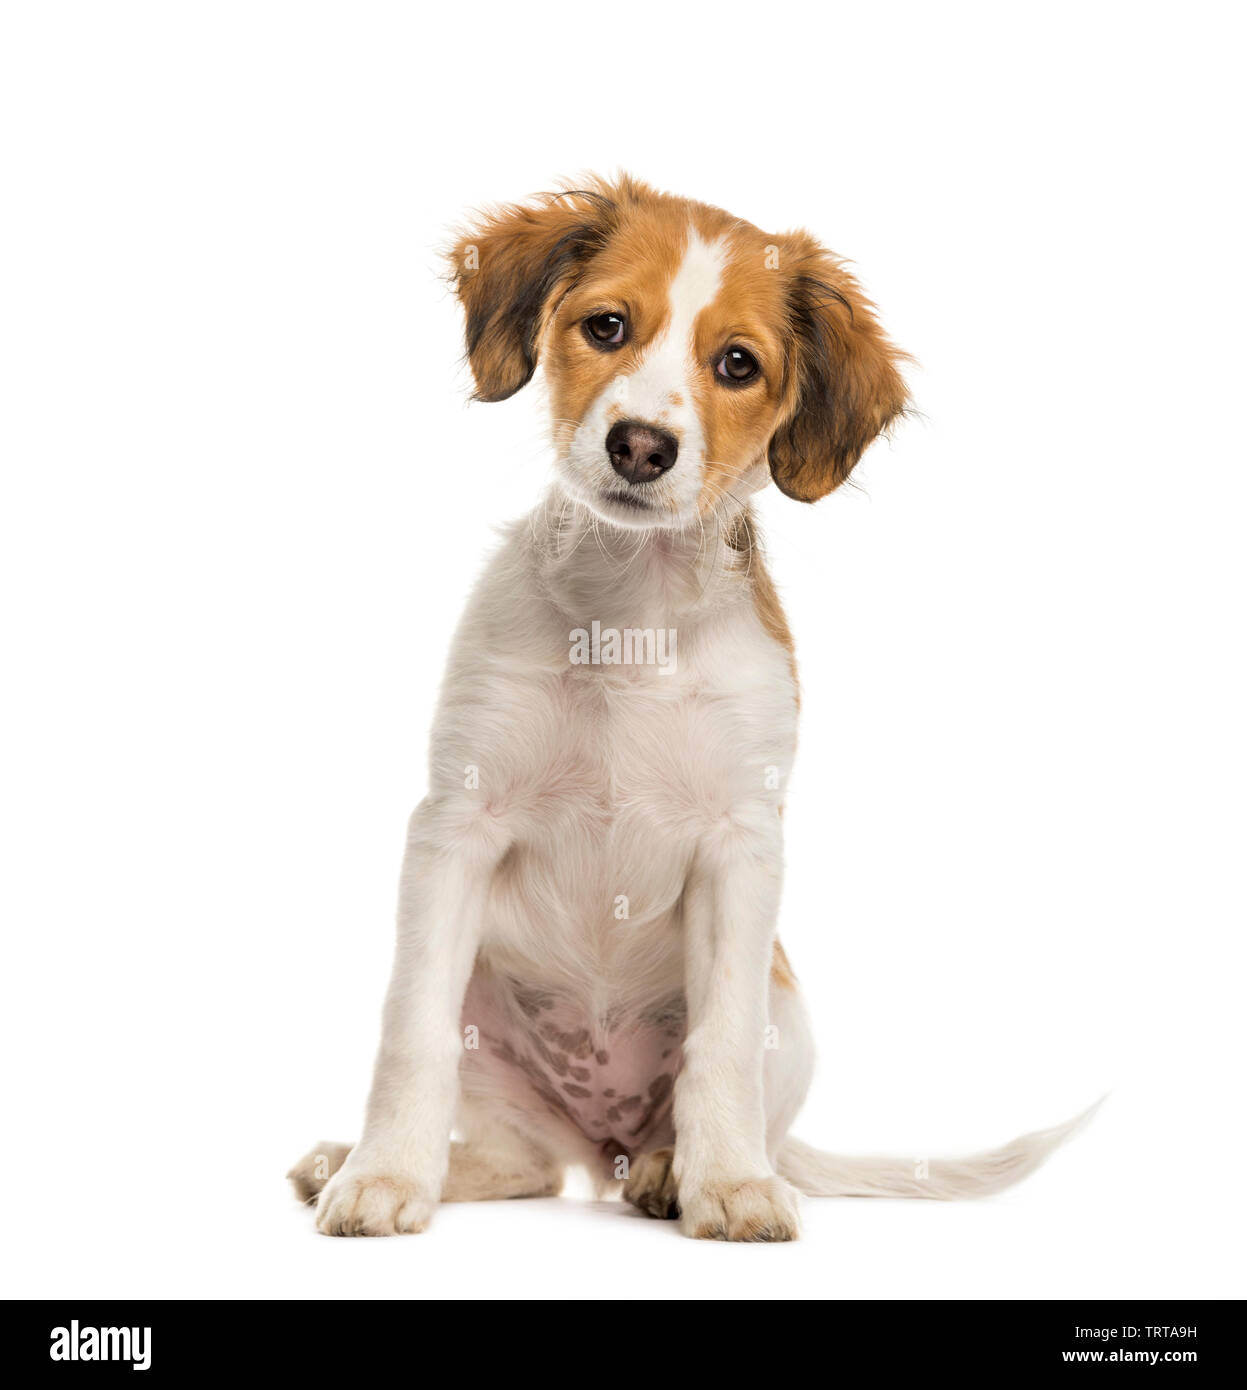 Kooikerhondje, 3 months old, sitting in front of white background Stock Photo